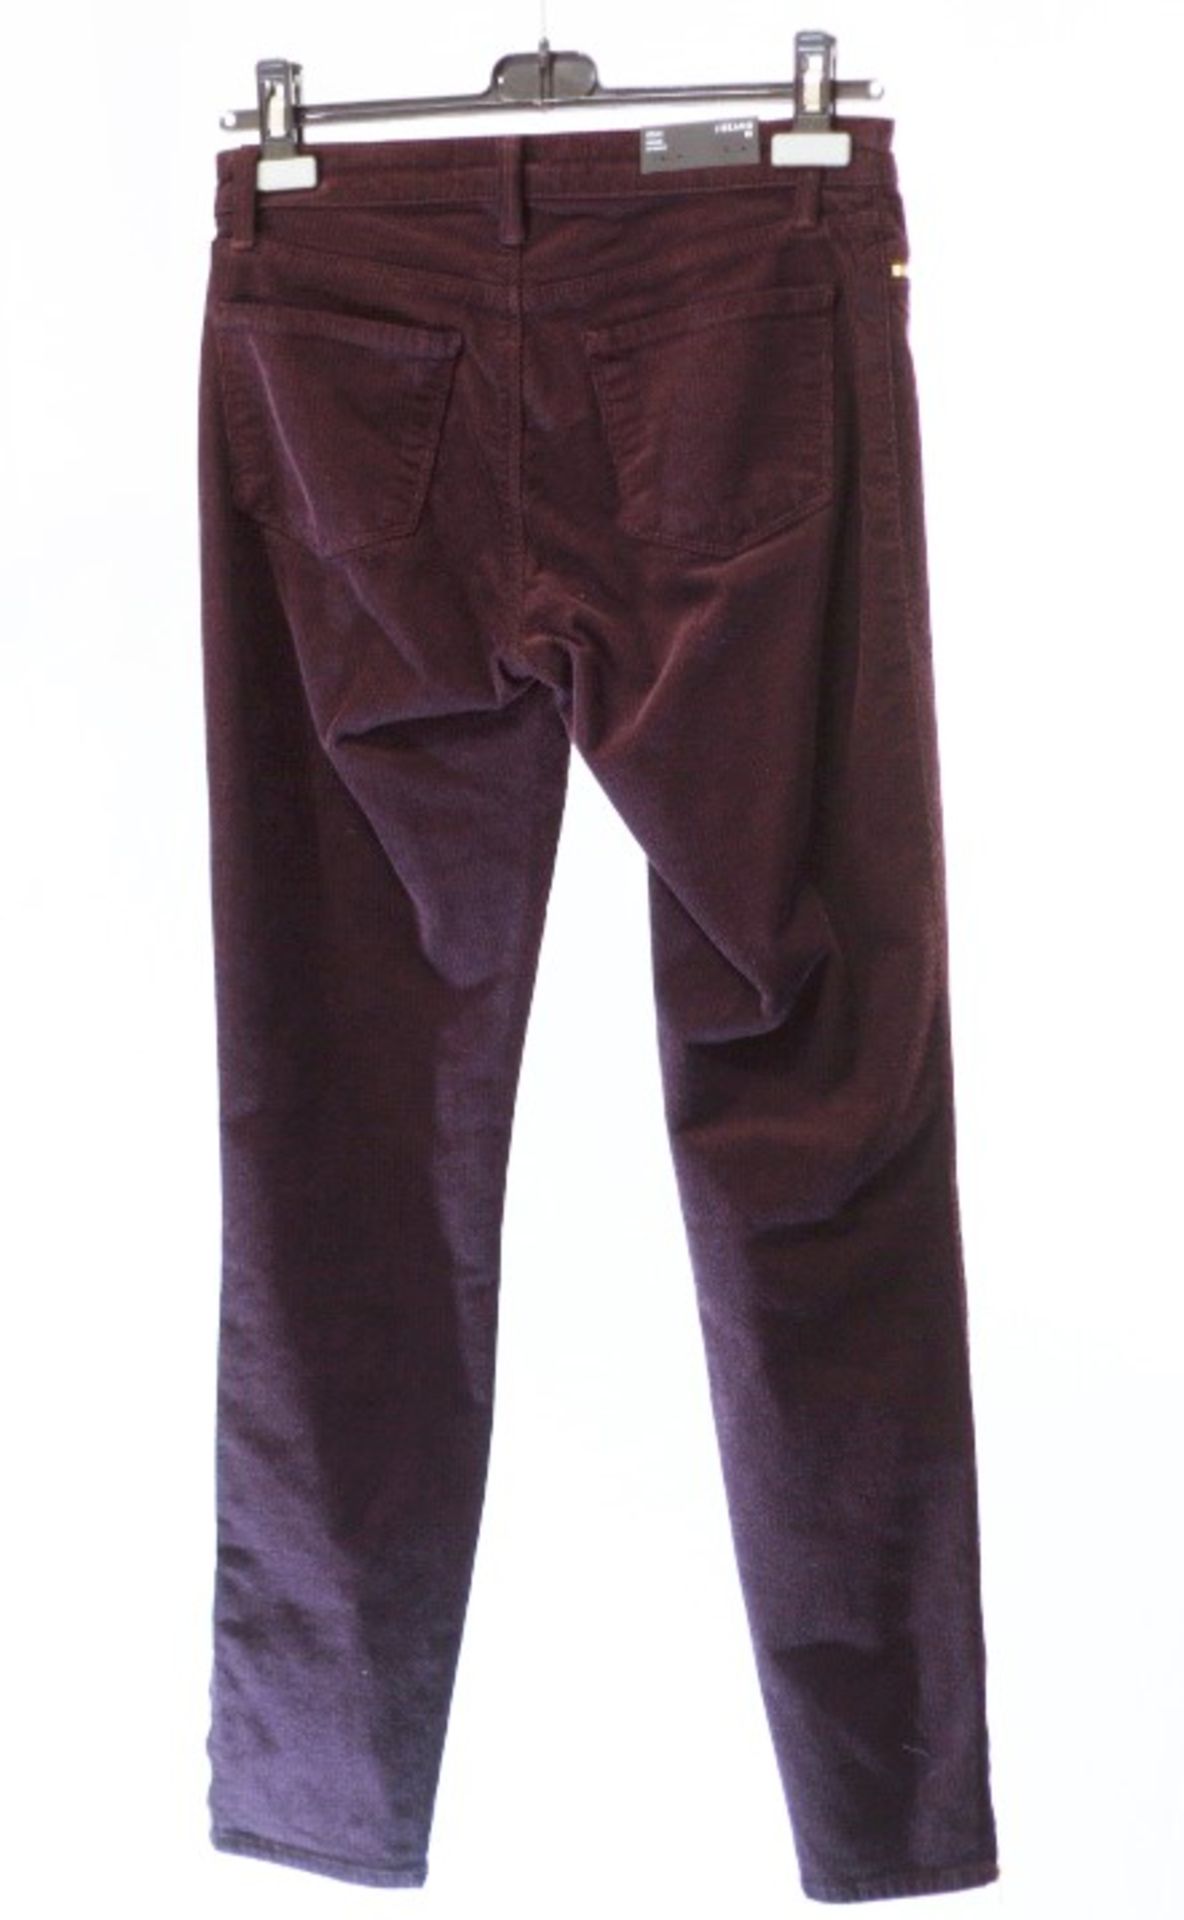 1 x J Brand Blackberry Corduroy Jeans - Size: 8 - Material: 56% Cotton, 37% Modal, 6% Polyester, - Image 5 of 6